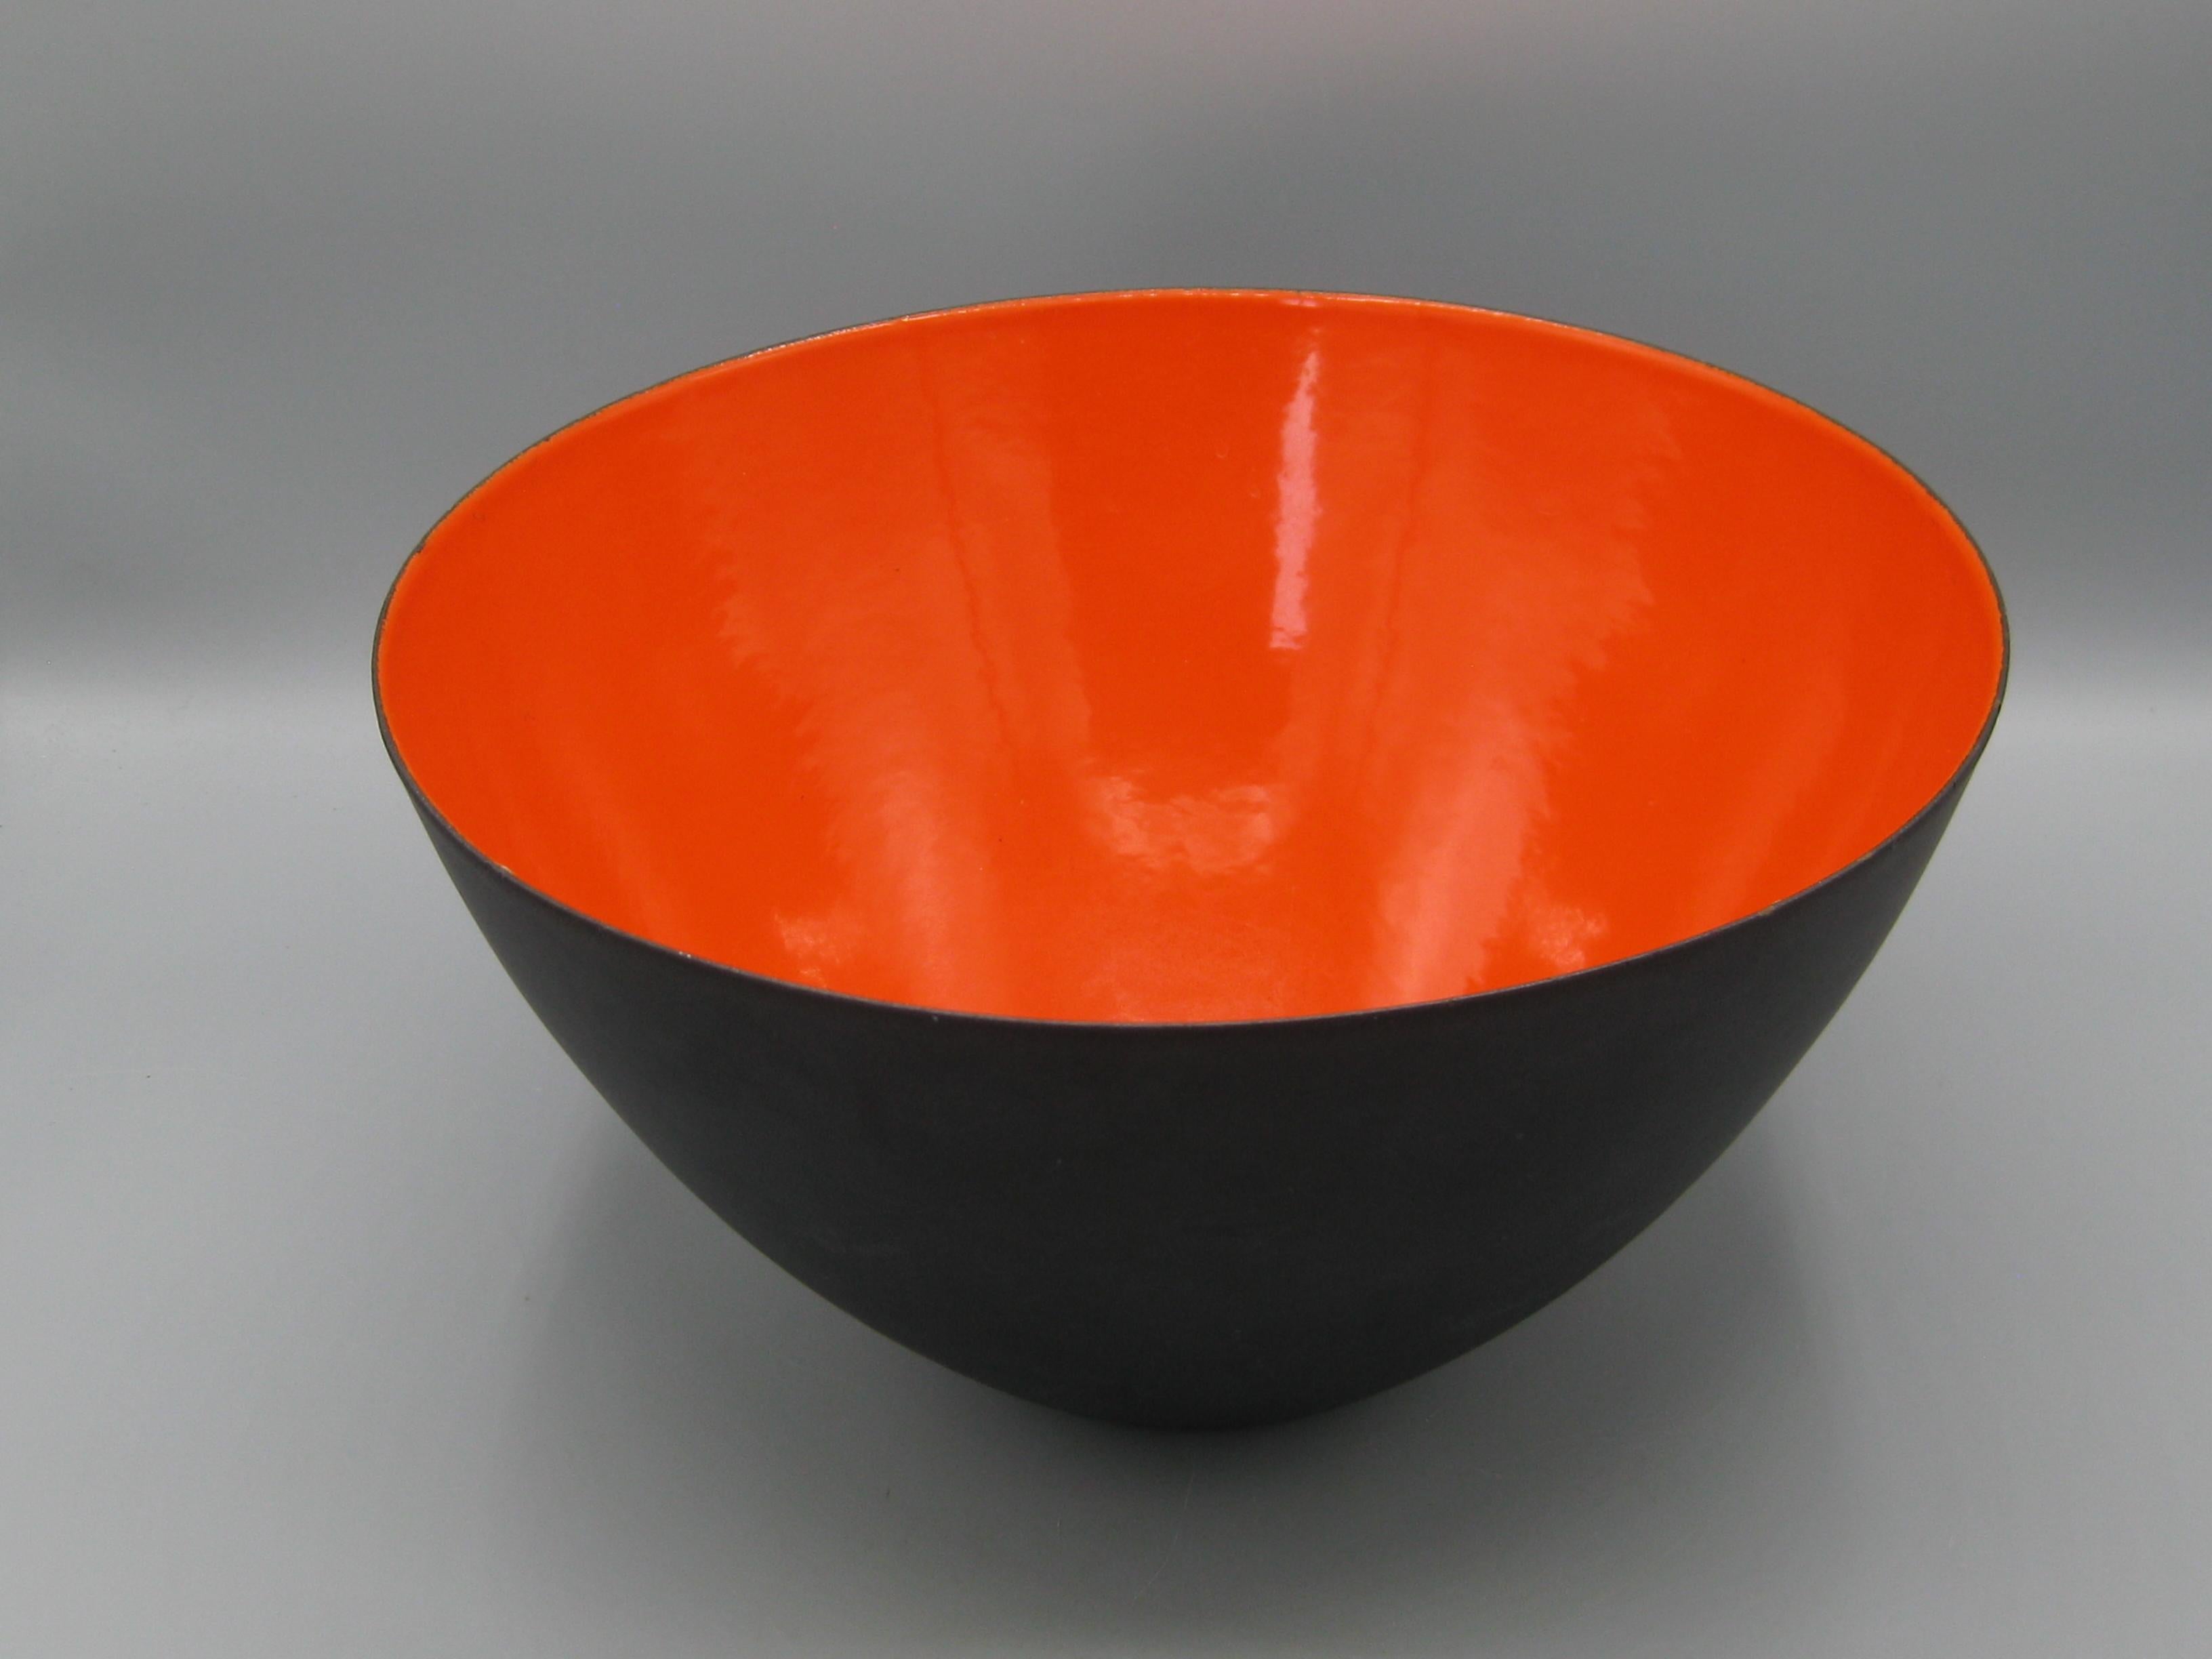 Wonderful early modernist large Krenit bowl designed by Danish designer Herbert Krenchel and dates from the 1950's. Made in Denmark and is signed on the bottom. The bowl has an orange enamel finish on the inside surface and a matte black outer